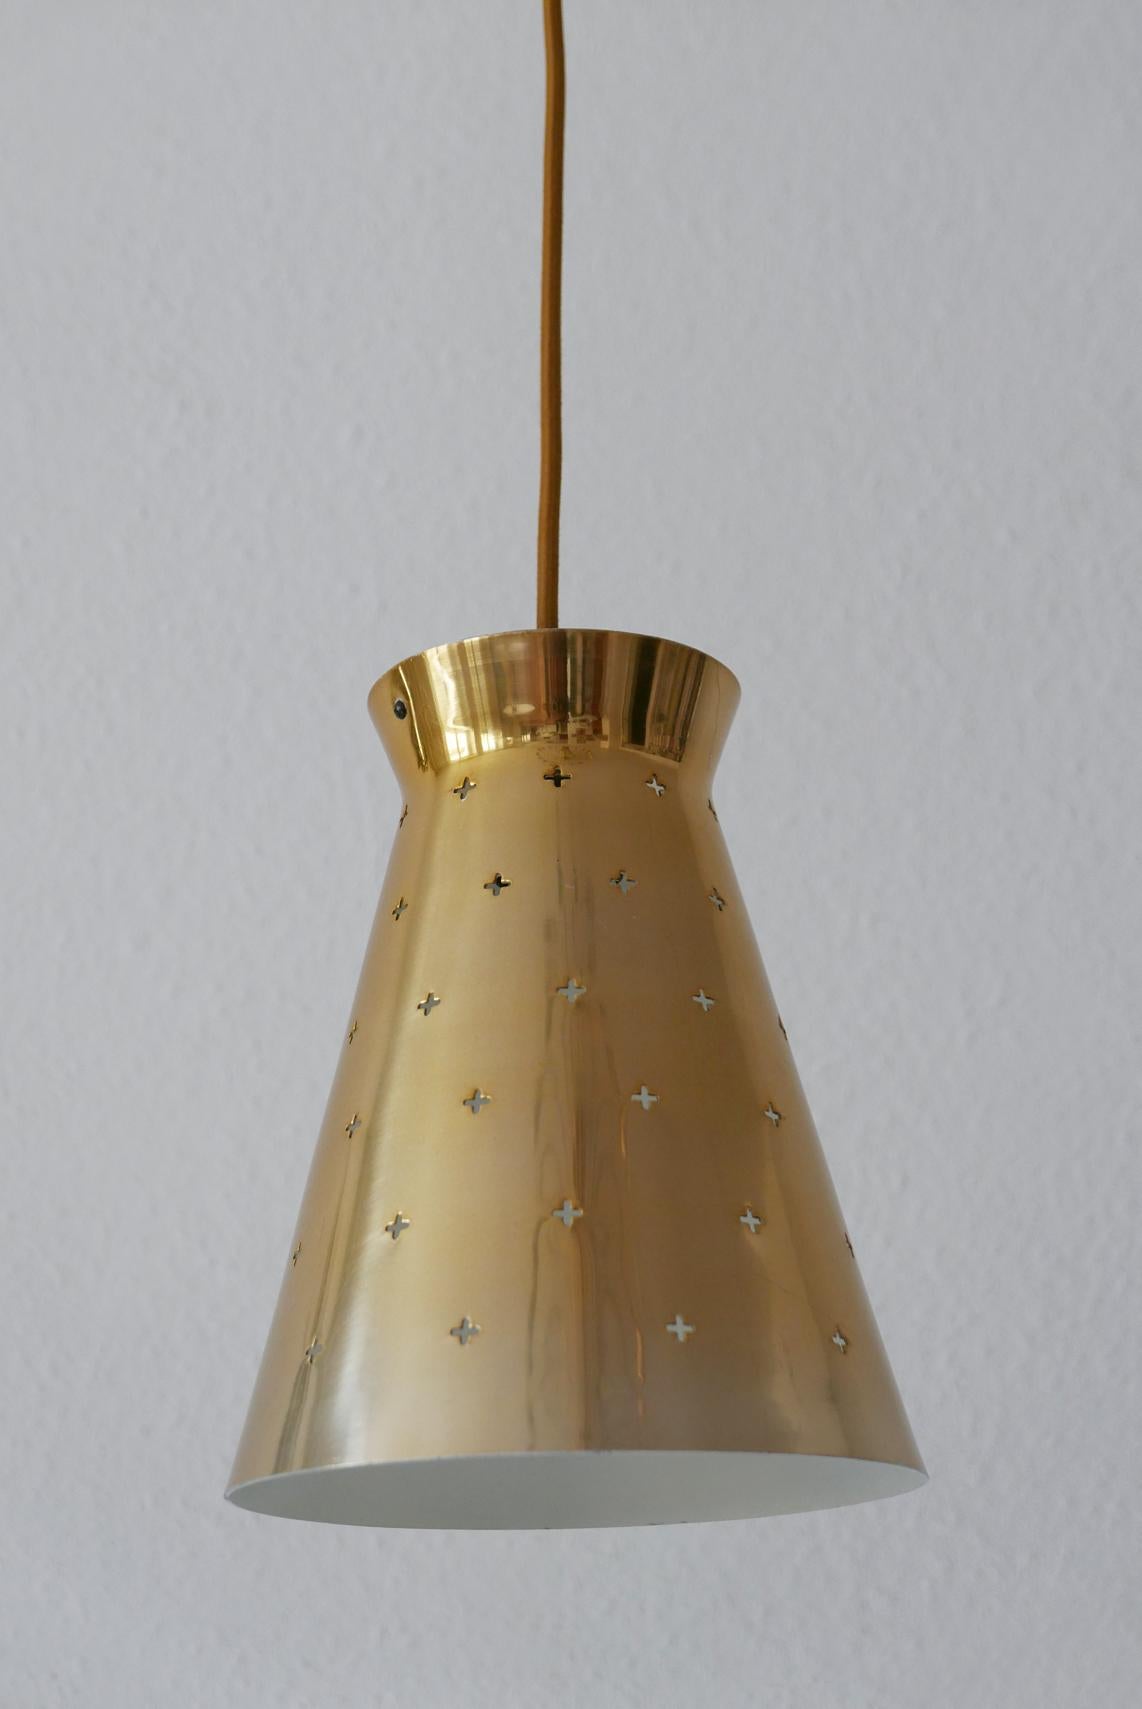 Lovely Mid-Century Modern Diabolo Pendant Lamp by Hillebrand, 1950s, Germany For Sale 2